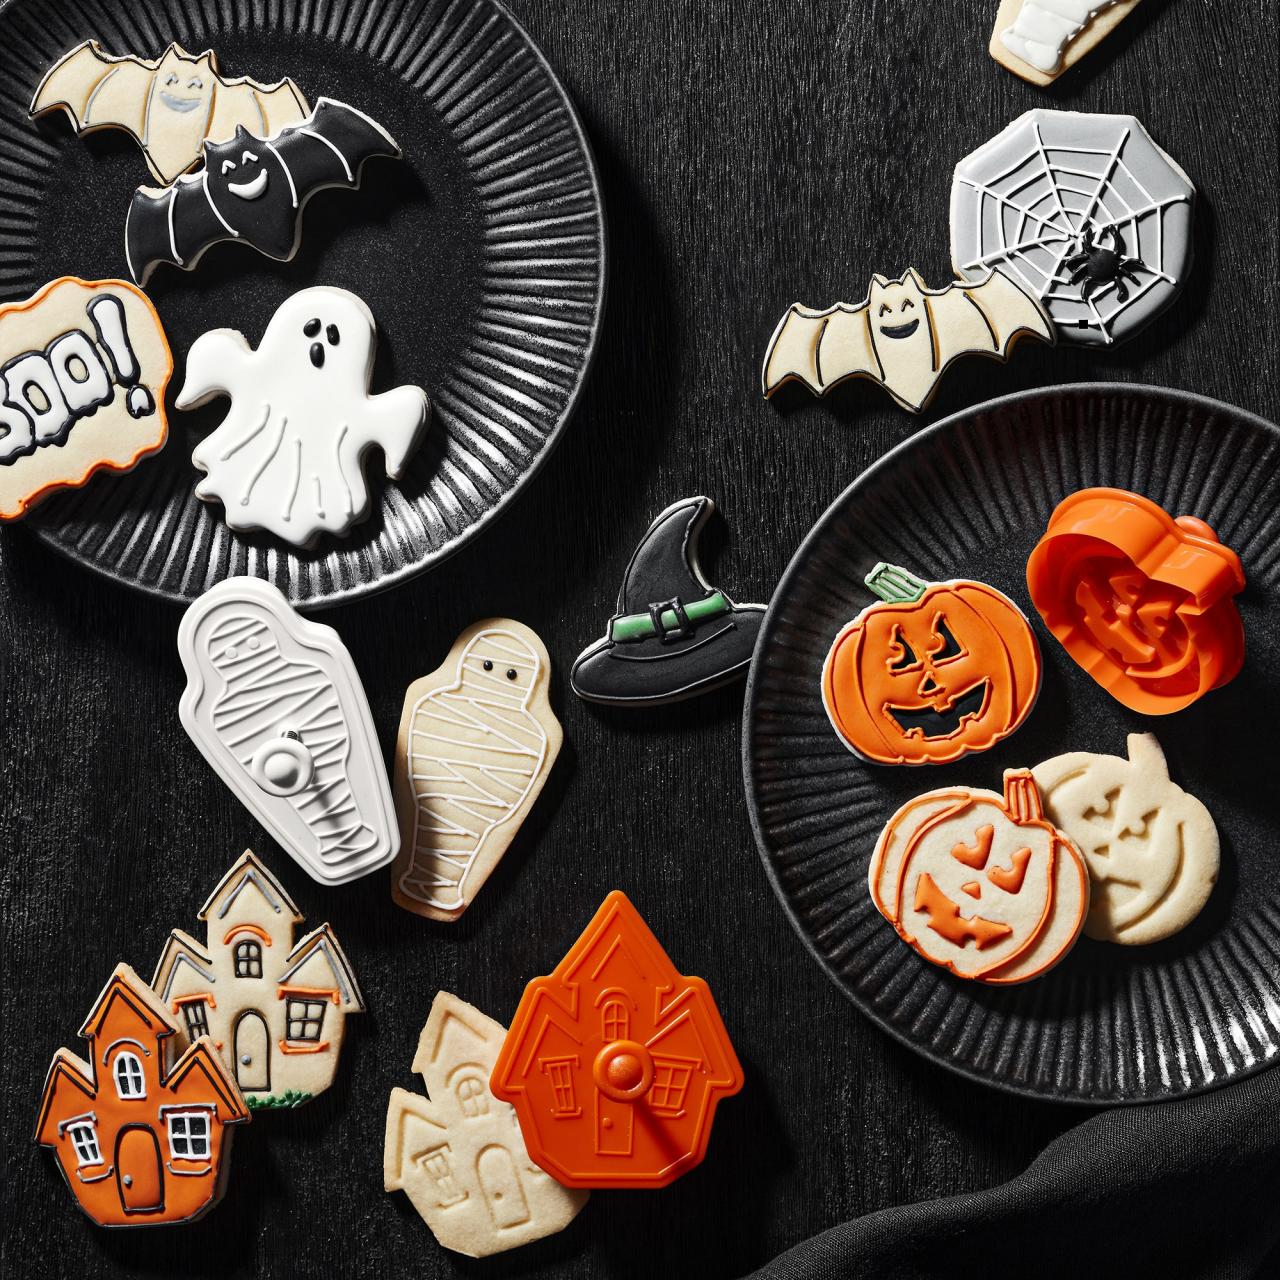 https://food.fnr.sndimg.com/content/dam/images/food/products/2023/9/15/rx_williams-sonoma_halloween-cookie-cutter-storybook-23-piece-xl.jpg.rend.hgtvcom.1280.1280.suffix/1694808837377.jpeg